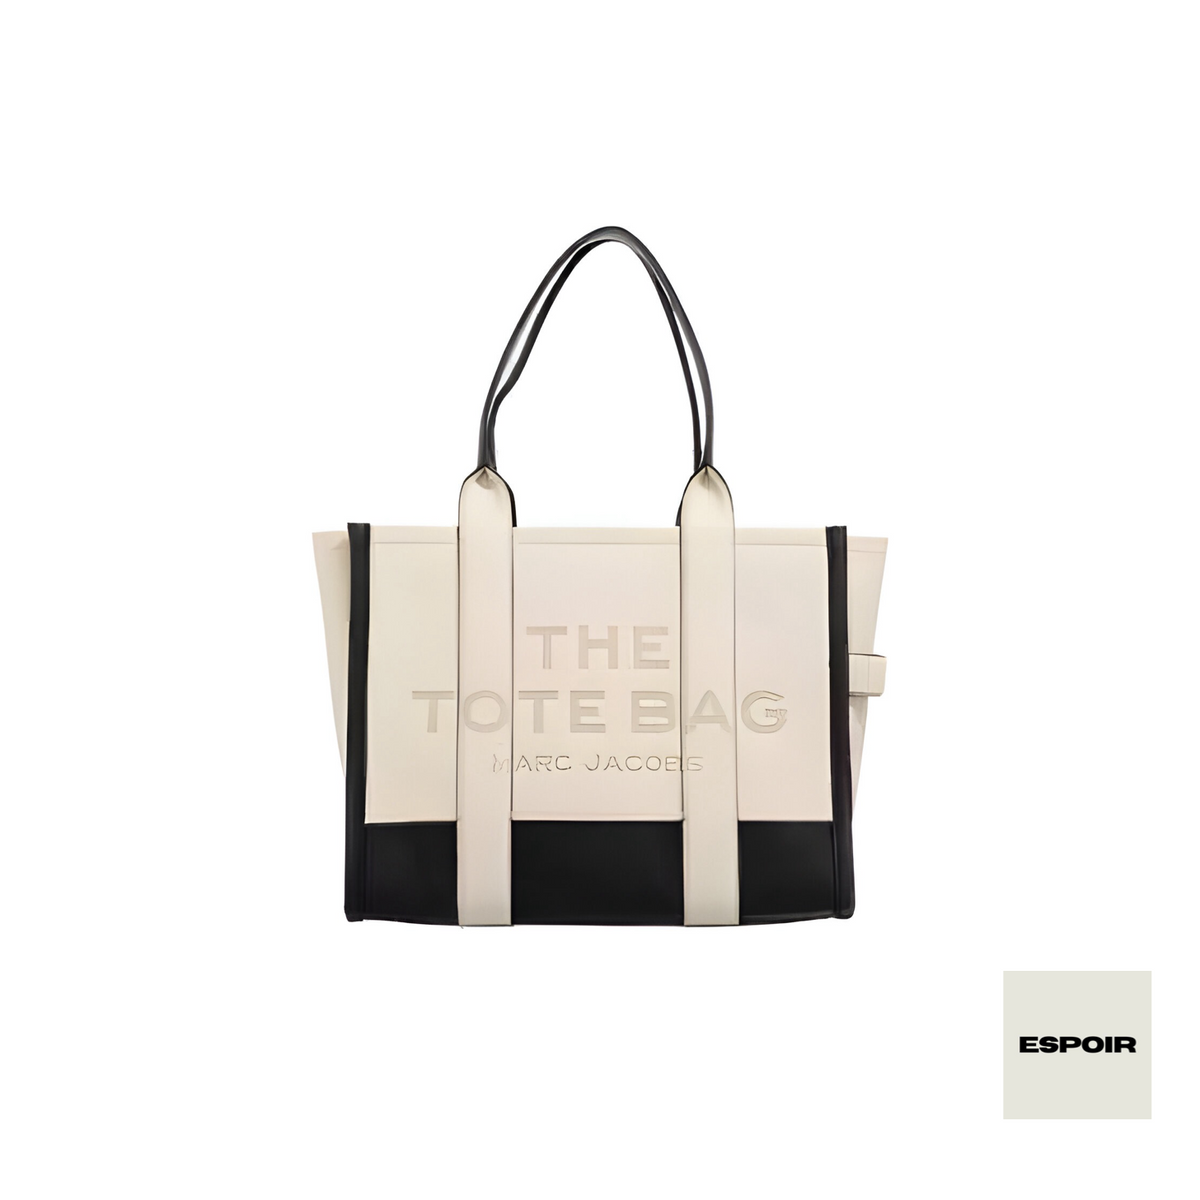 Marc Jacobs The Leather Tote Bag LARGE- ivory multi